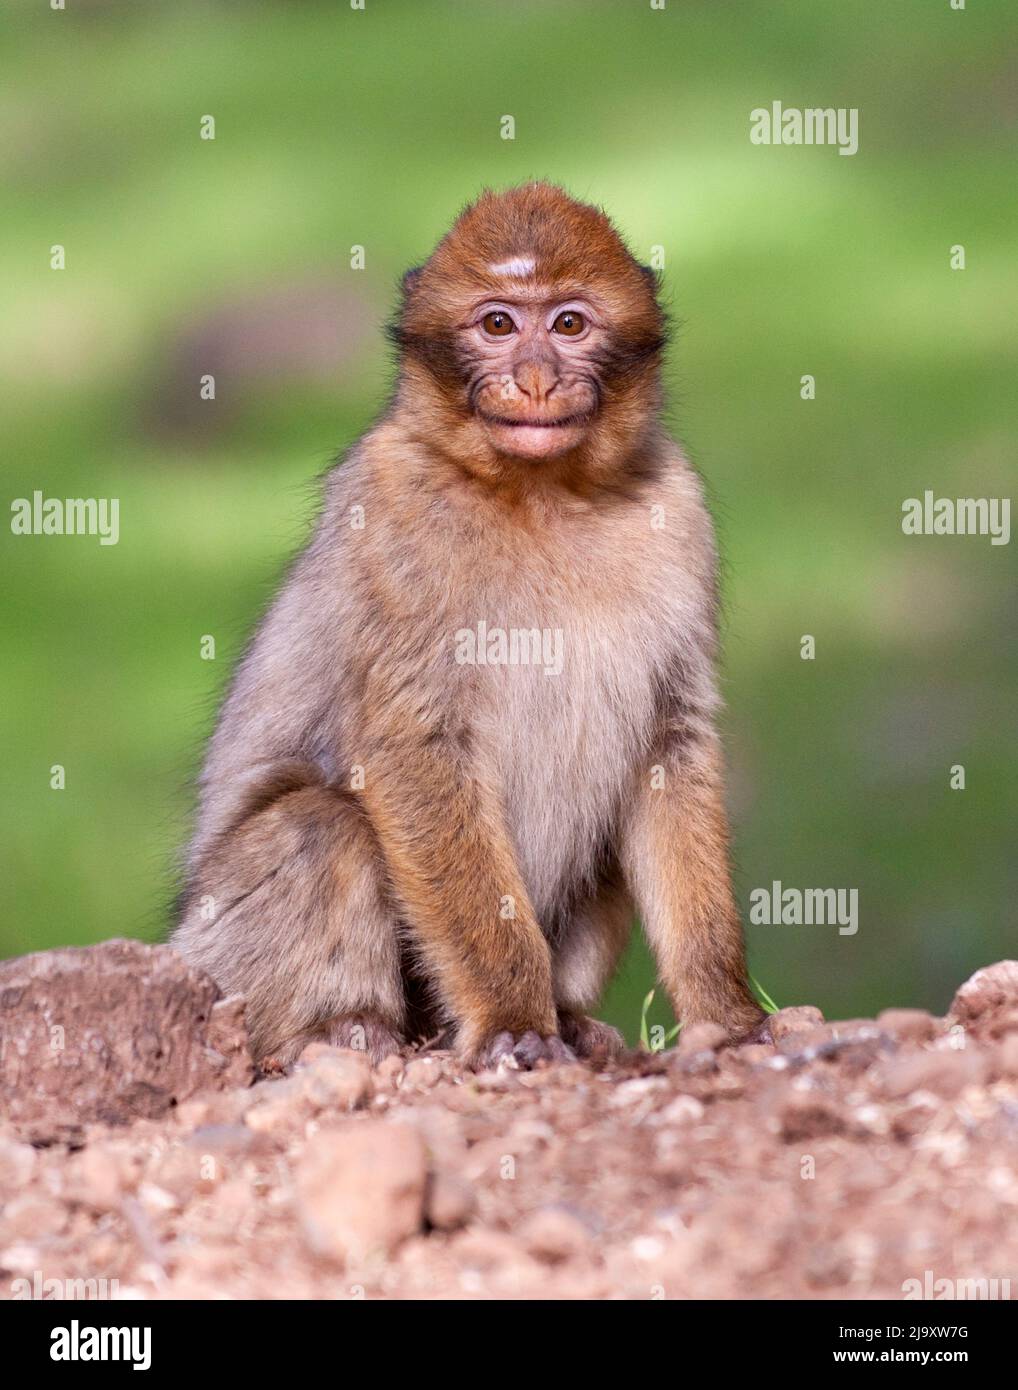 A Barbary Macaque, also known as a Barbary Ape, from the cedar forest of the Middle Atlas region of Morocco. Stock Photo